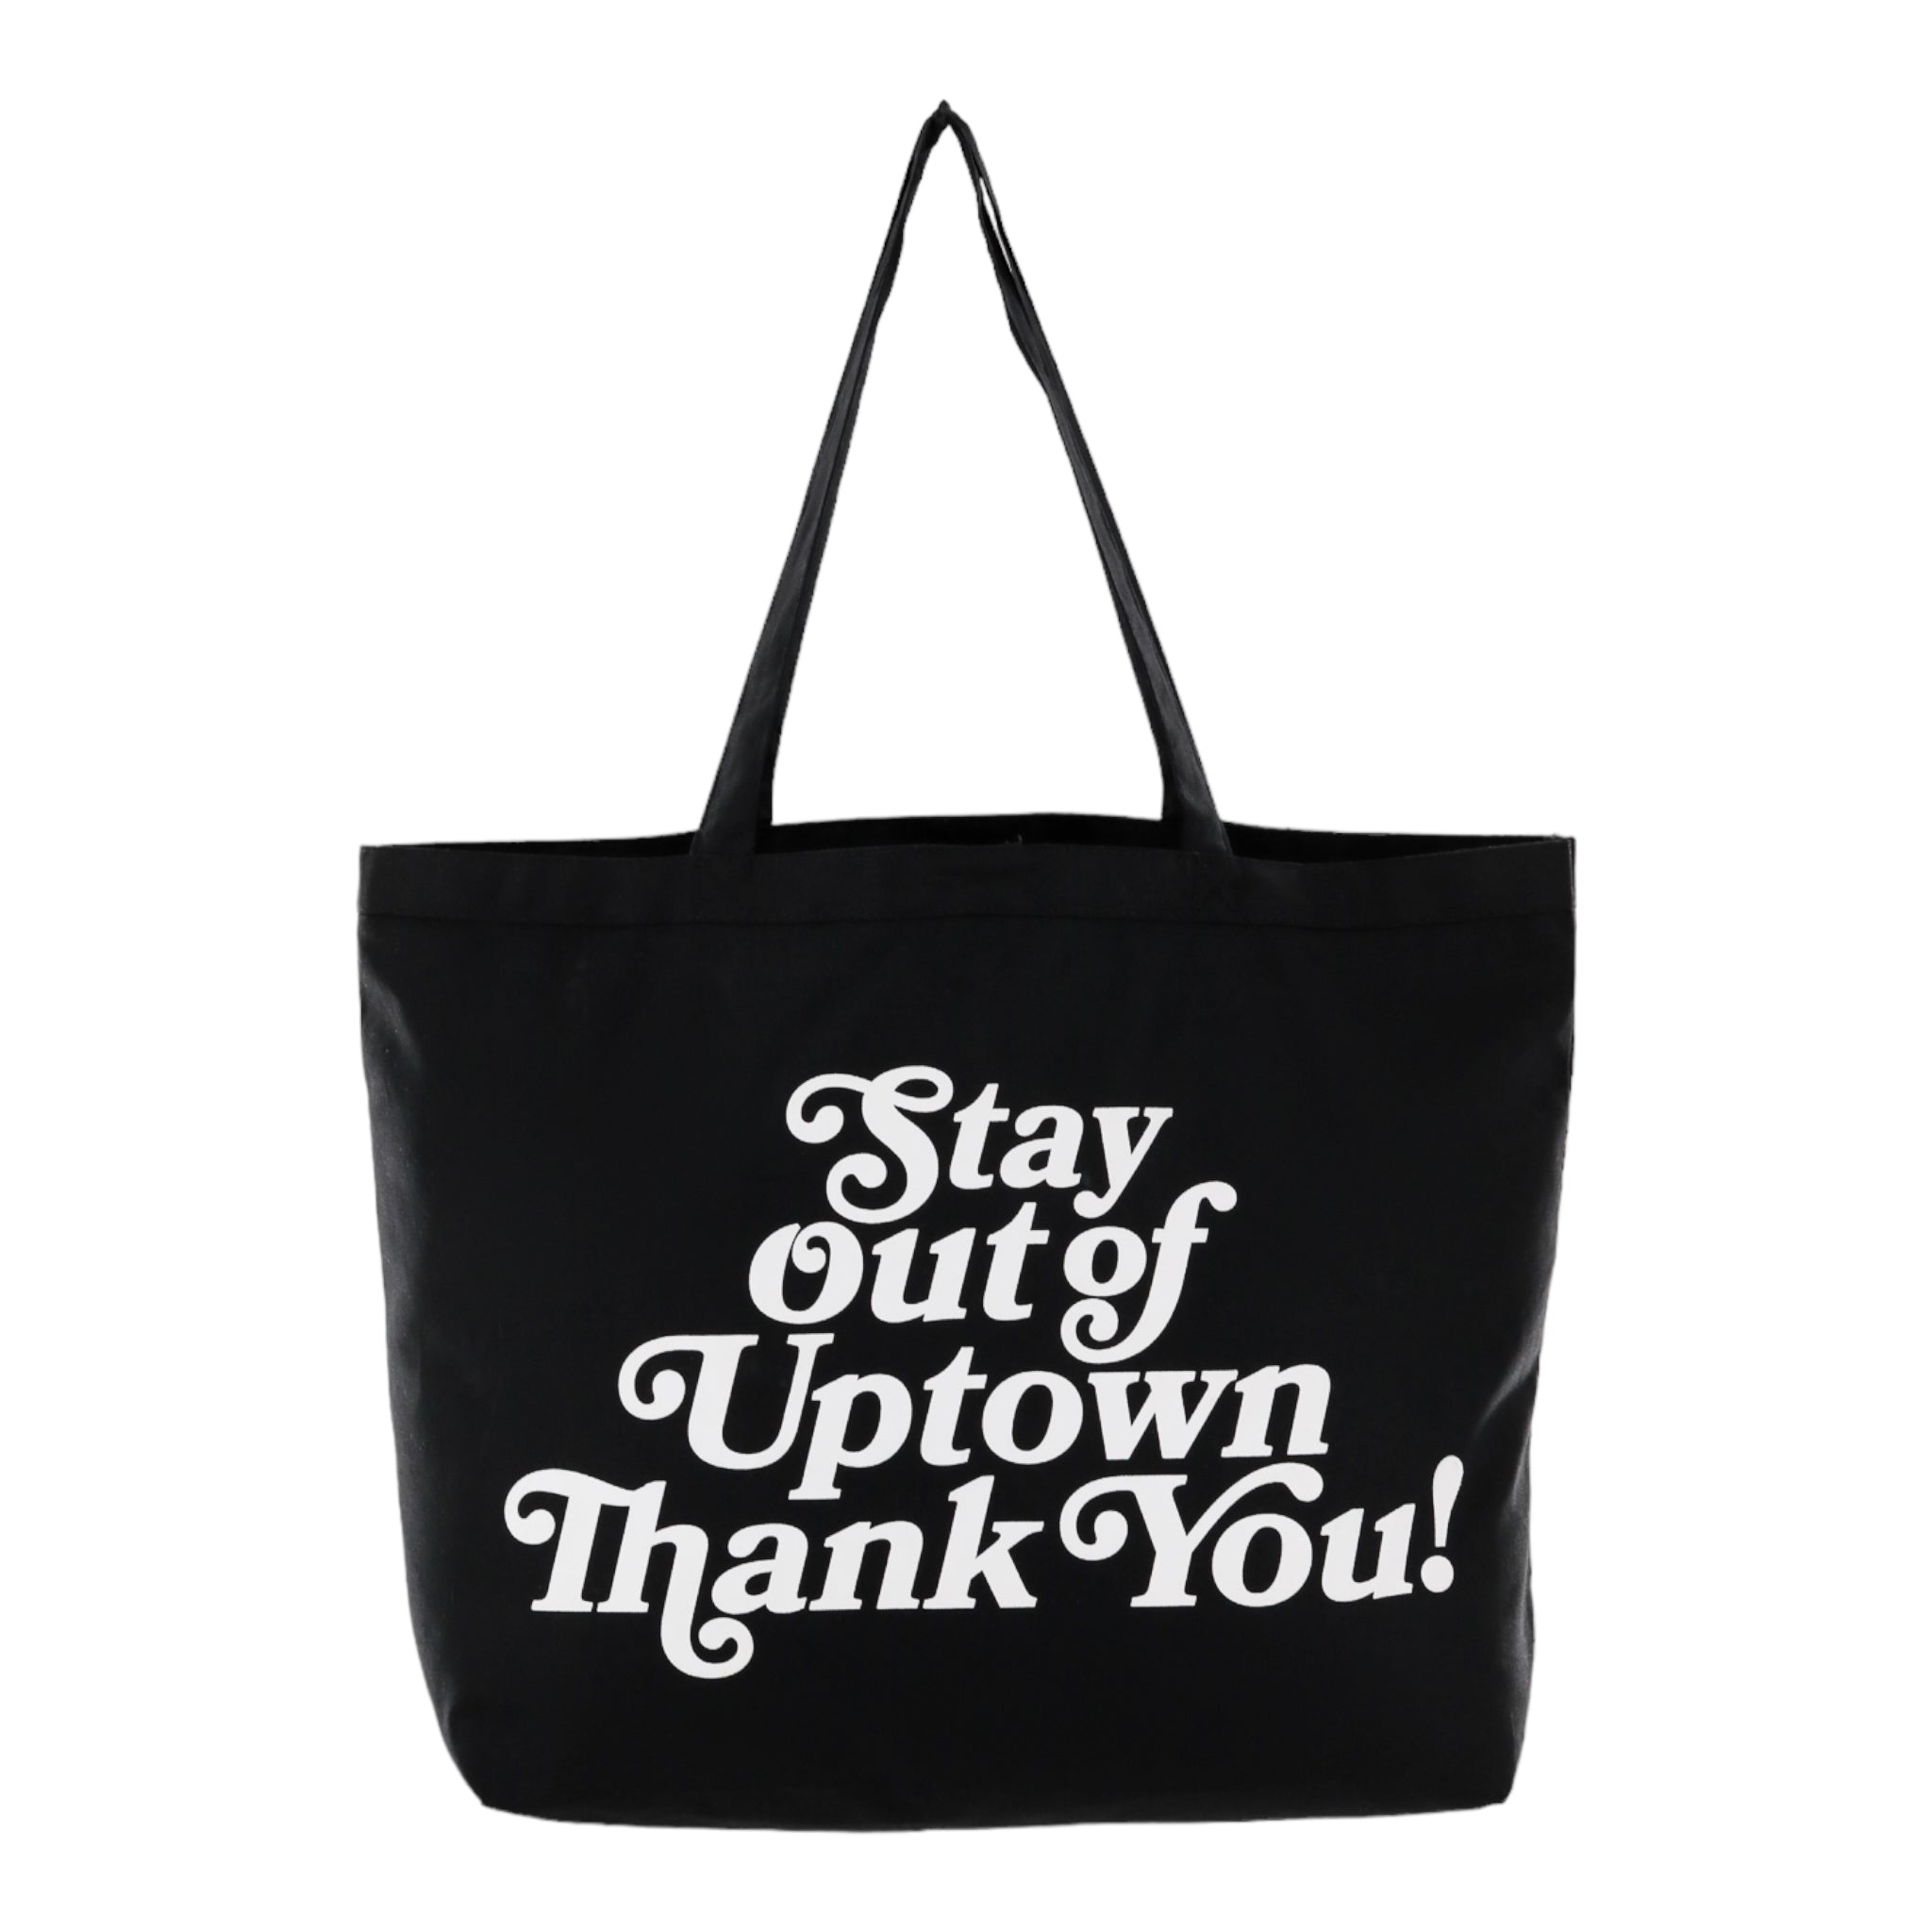 Stay Out of Uptown - Black Canvas Tote Bag